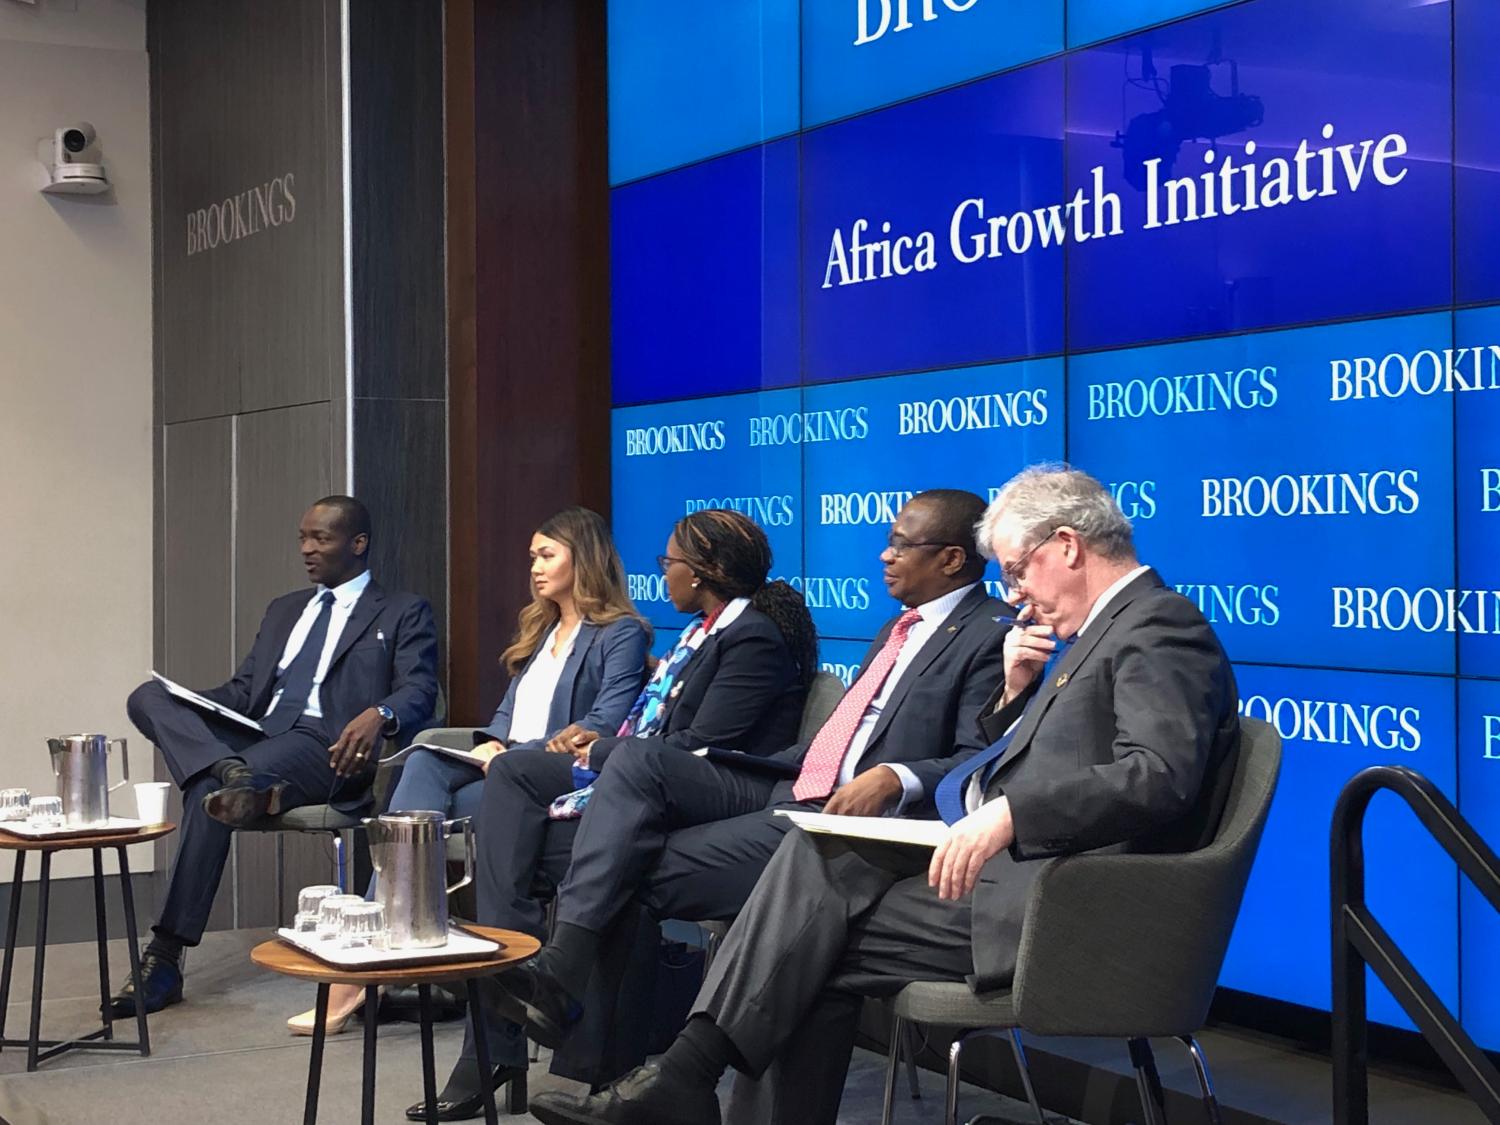 Panelists discuss the prospect of another debt crisis in sub-Saharan Africa.